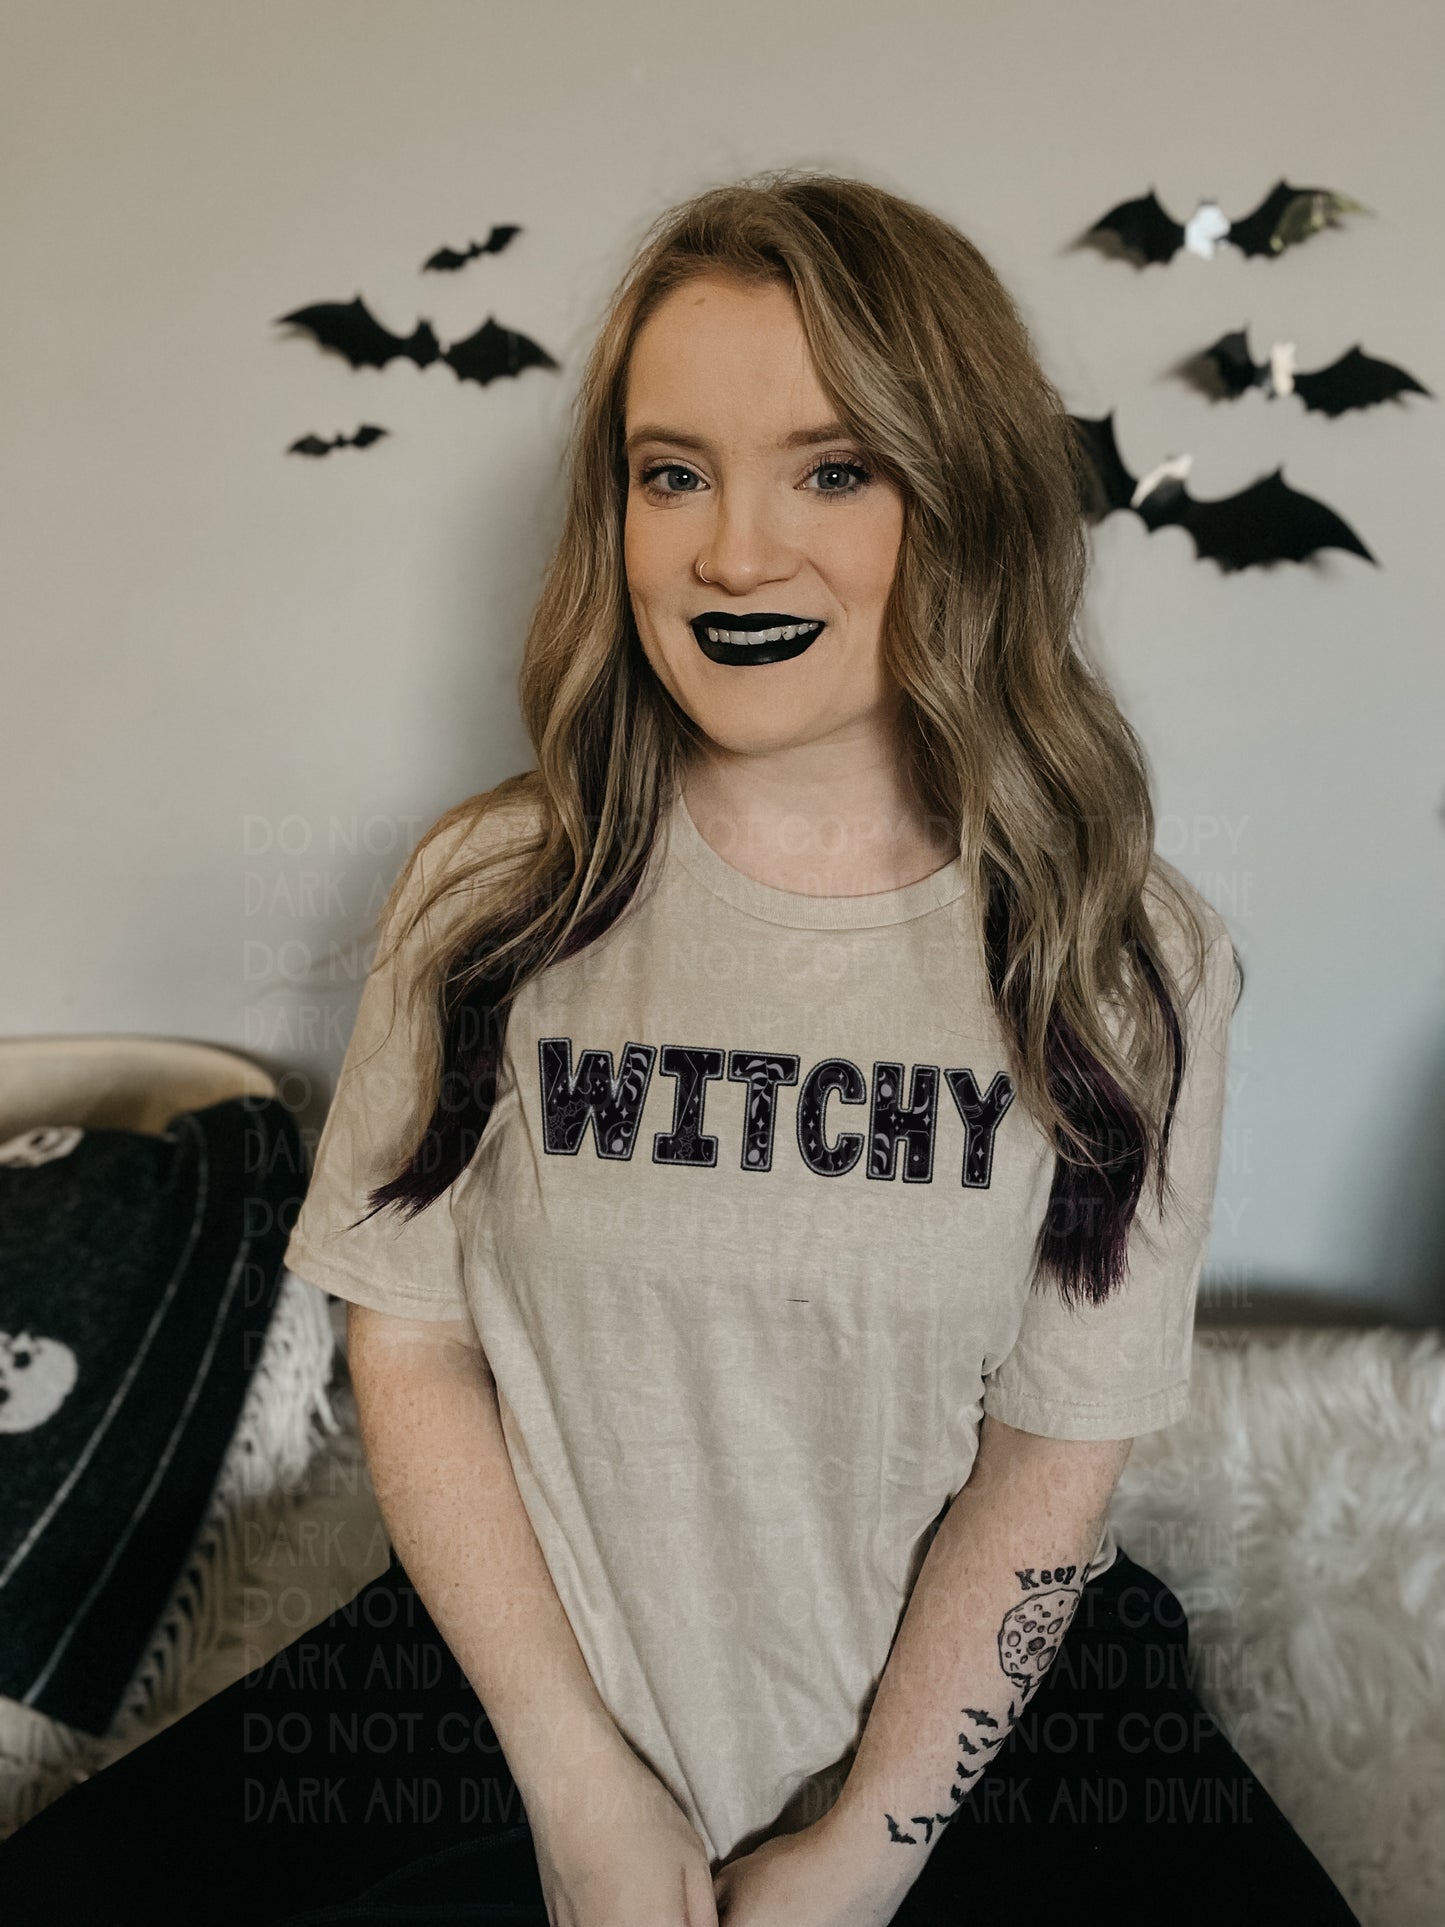 Witchy Embroidery -DIGITAL DOWNLOAD